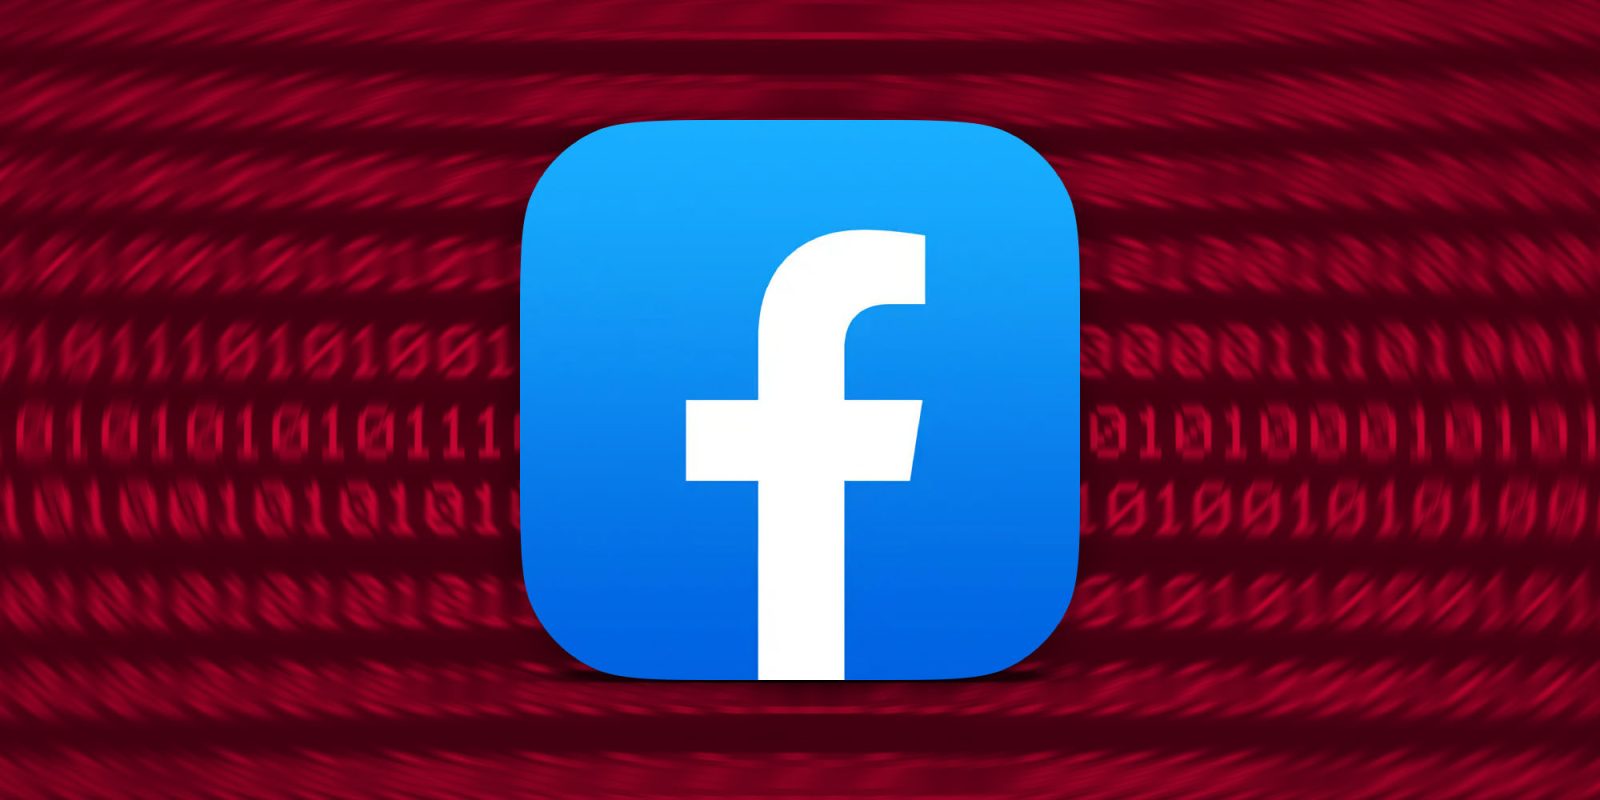 Facebook privacy settlement claim